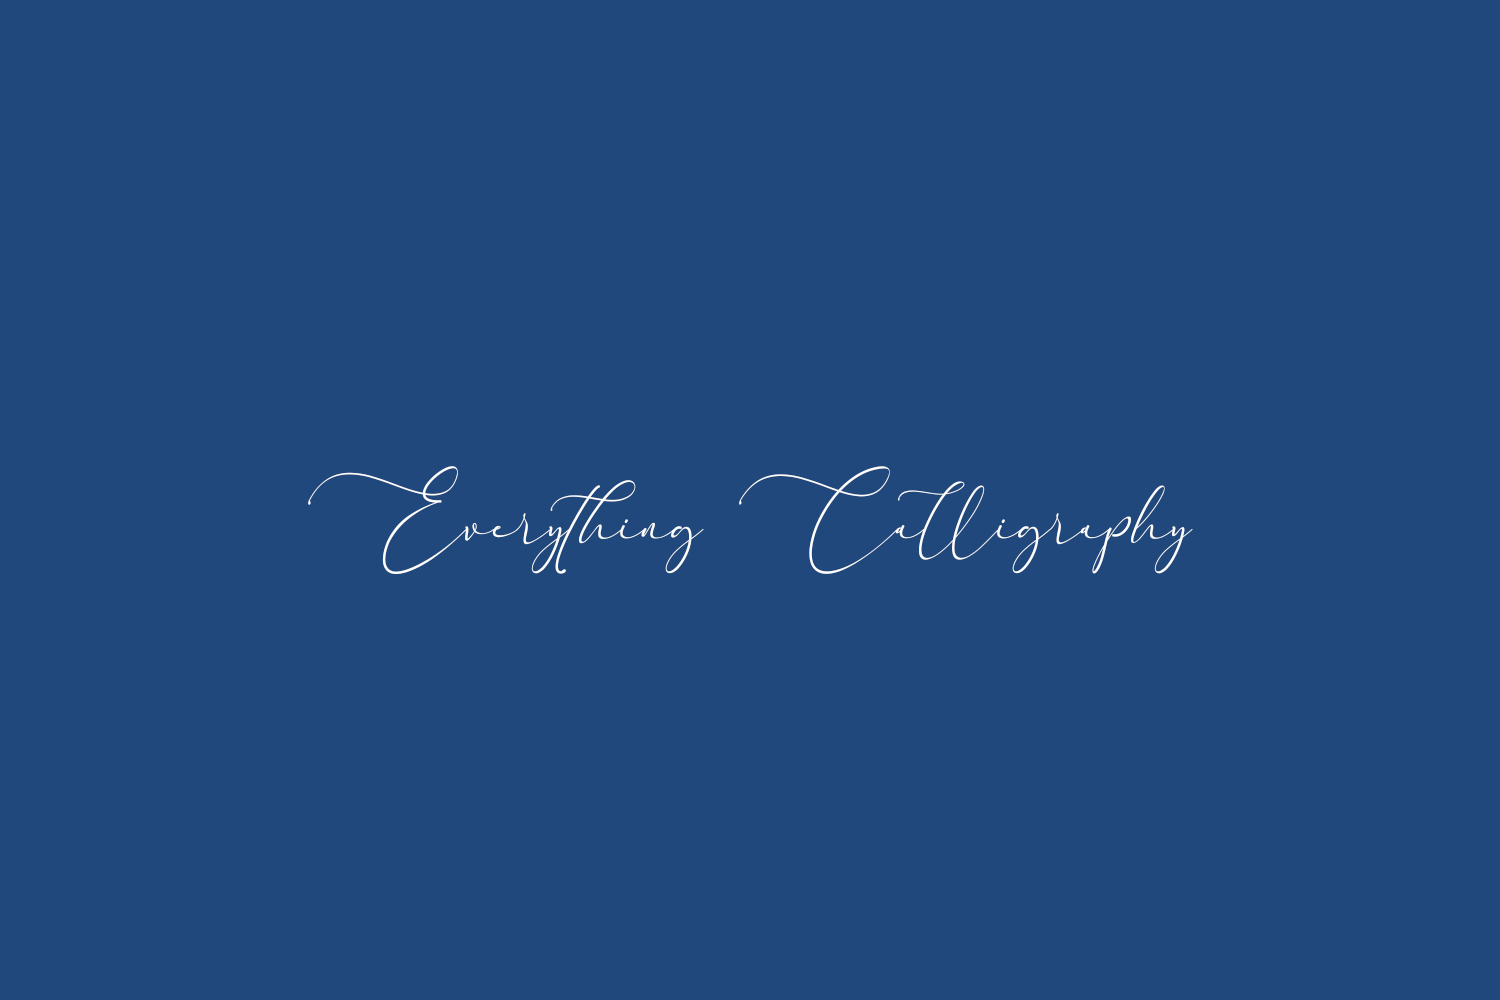 Everything Calligraphy